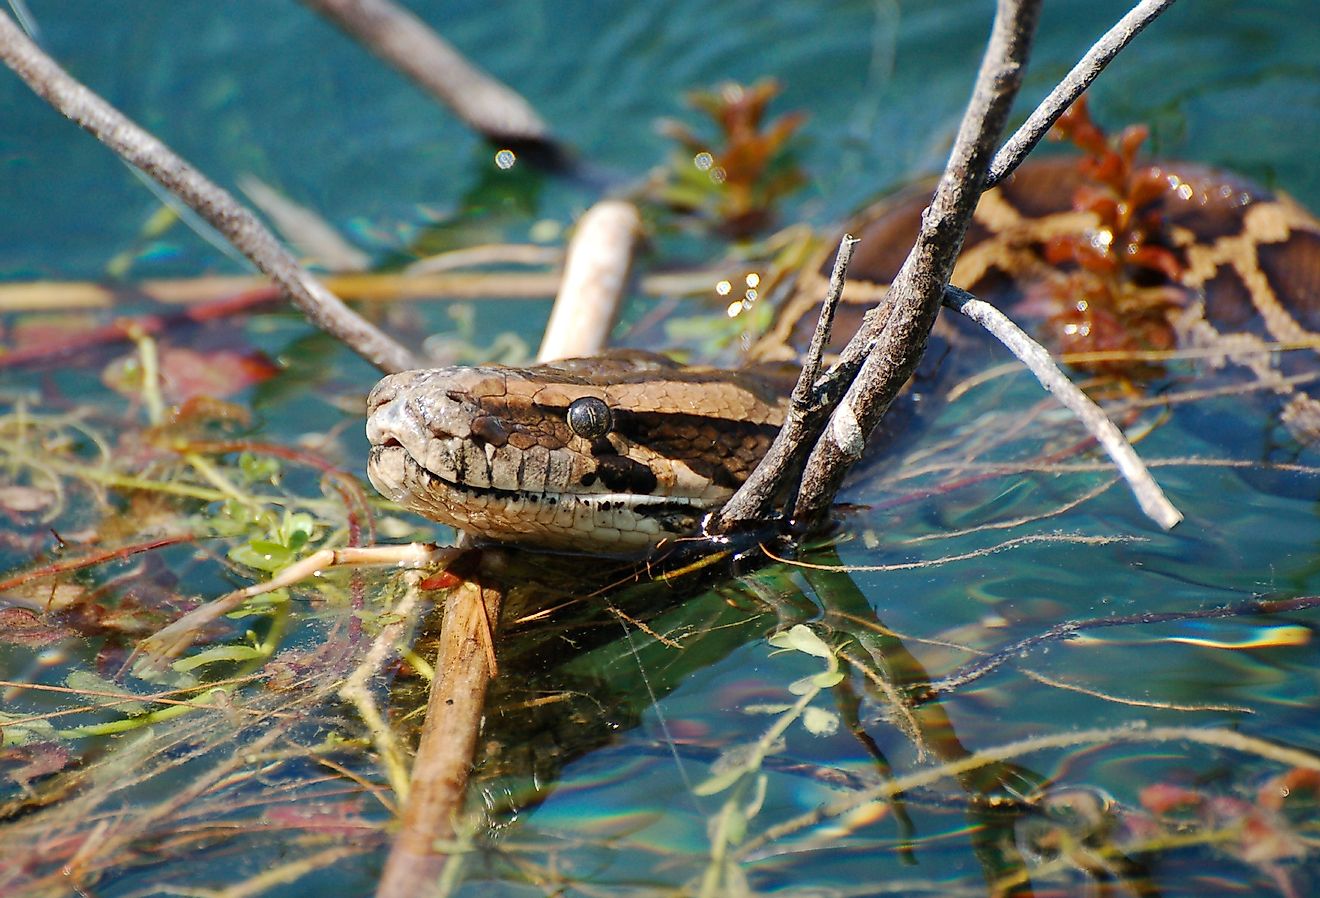 Burmese Python in the water in the Florida Everglades.